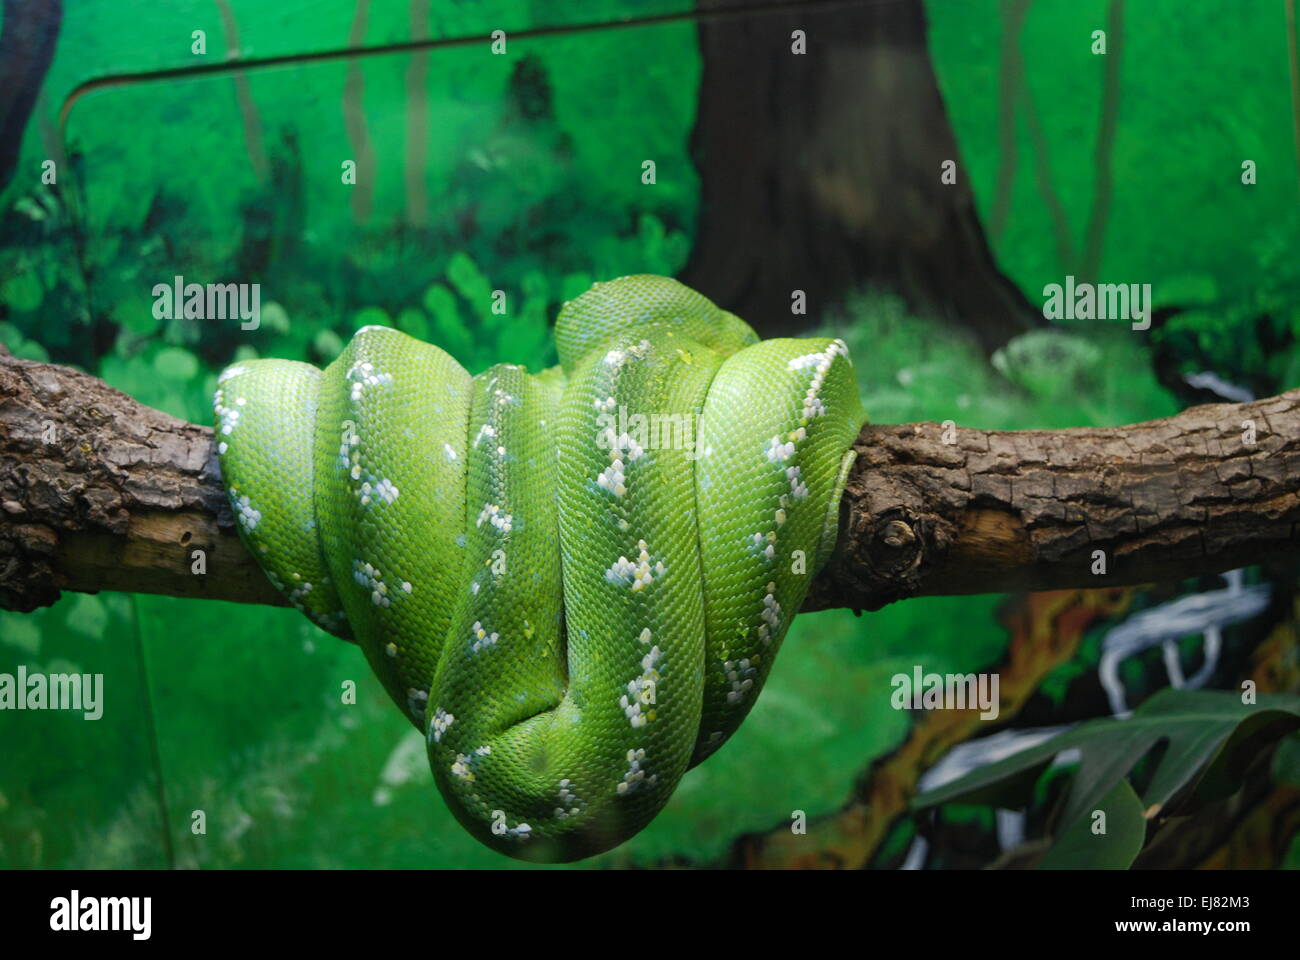 Green tree python wrapped around a branch Stock Photo